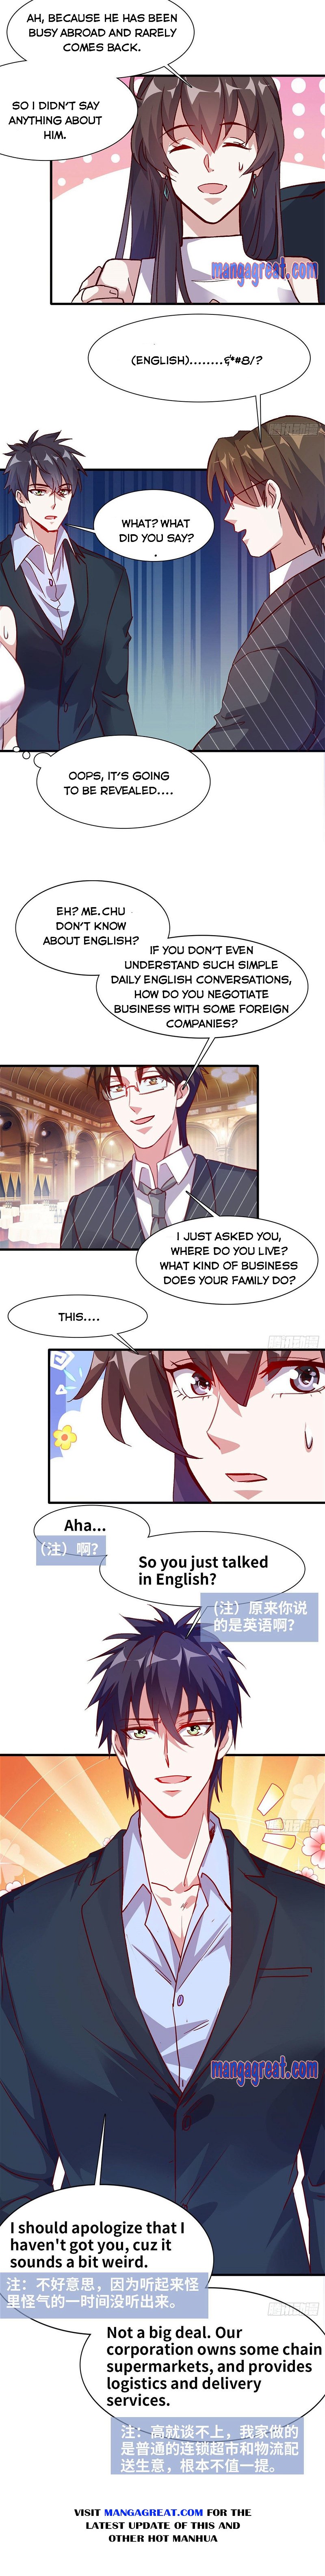 The School Beauty President Is All Over Me Chapter 4 - Page 4